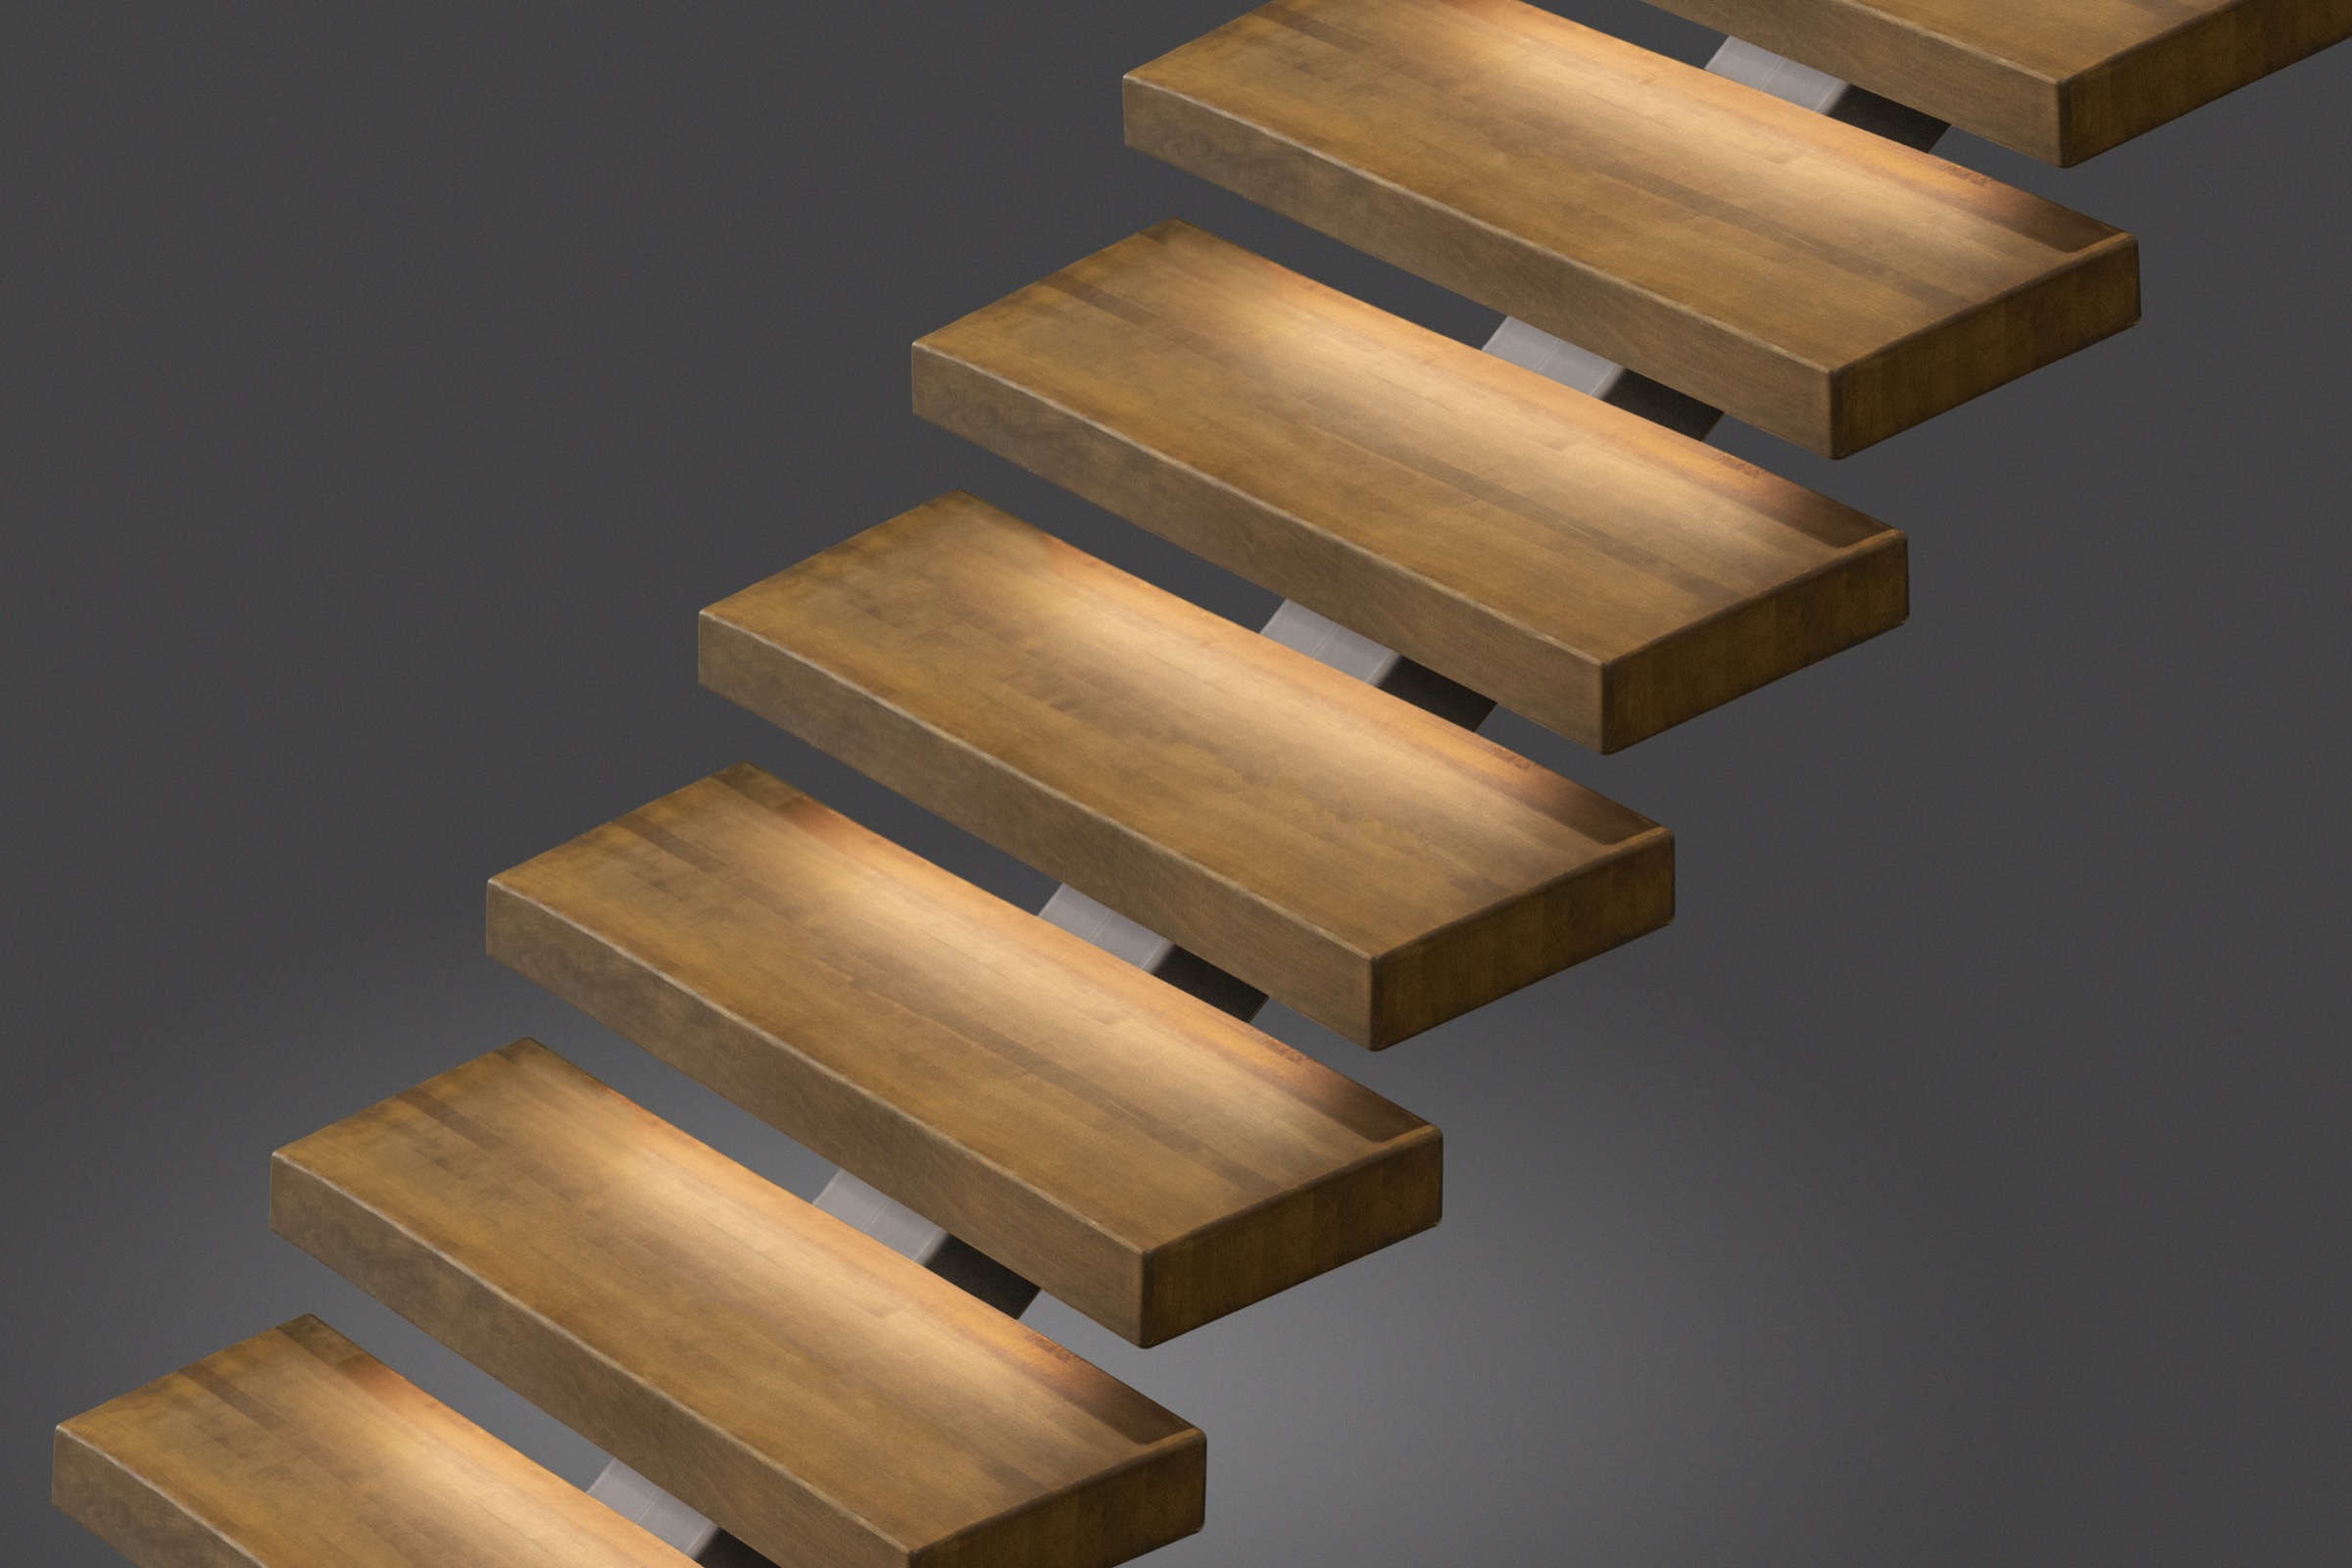 These floating wooden steps are against a grey background.